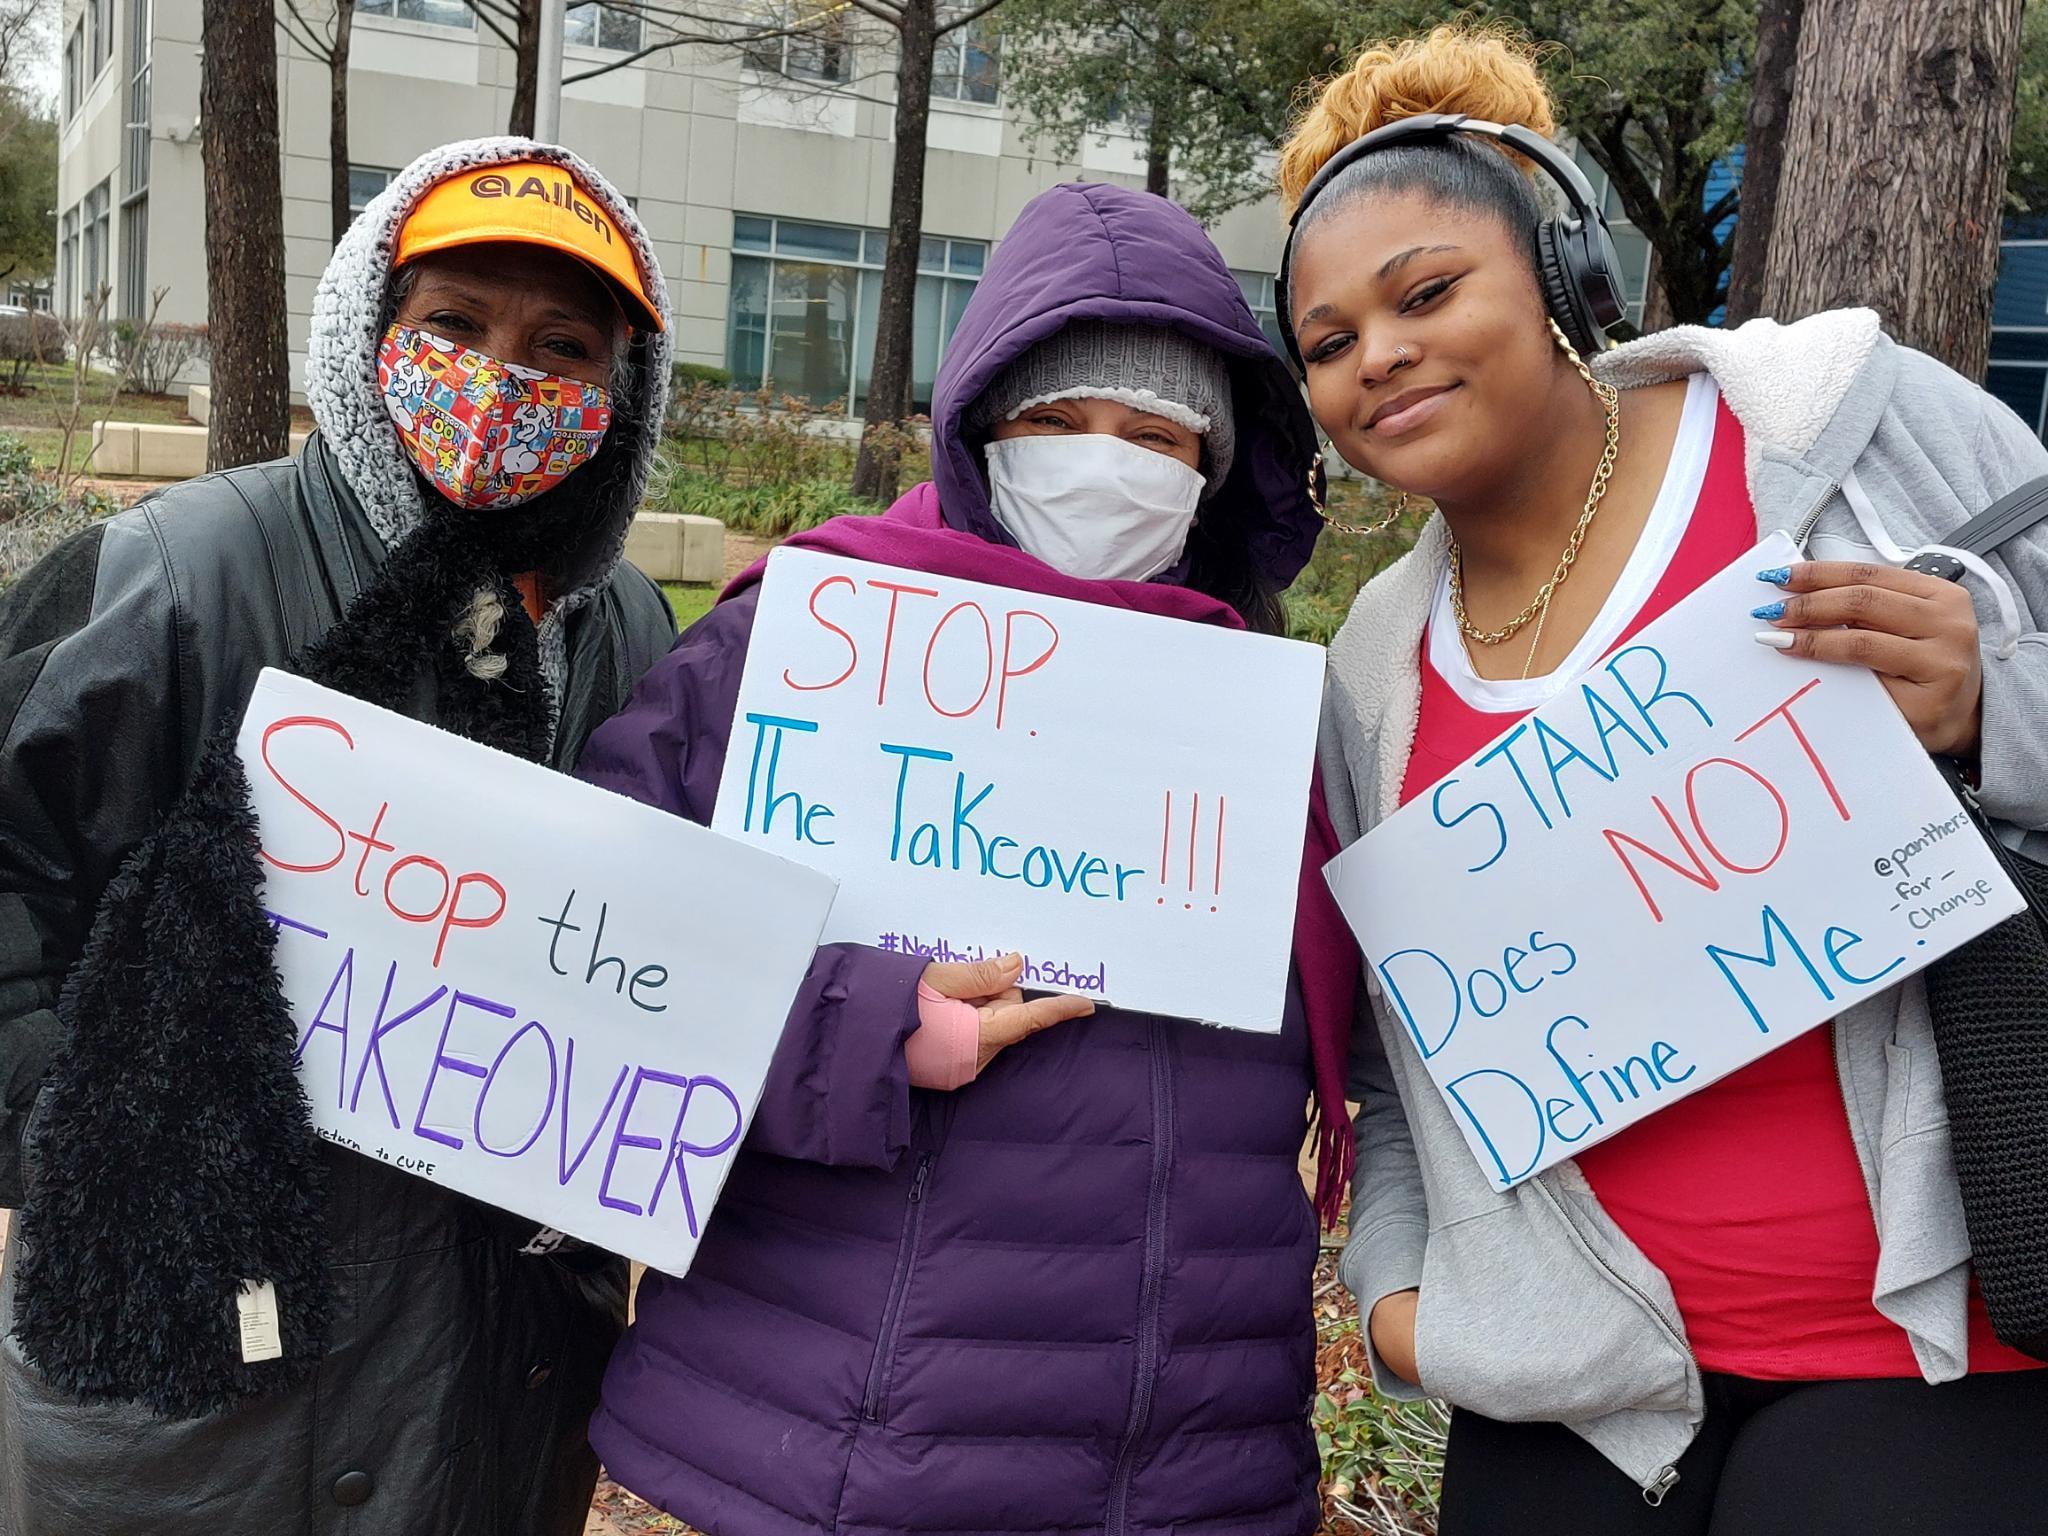 Three people gather at a winter-time protest, wearing cold-weather clothes, to protest the Houston ISD takeover. Two hold signs that read "Stop the Takeover" while another is holding a sign that says "Starr Does NOT Define Me".